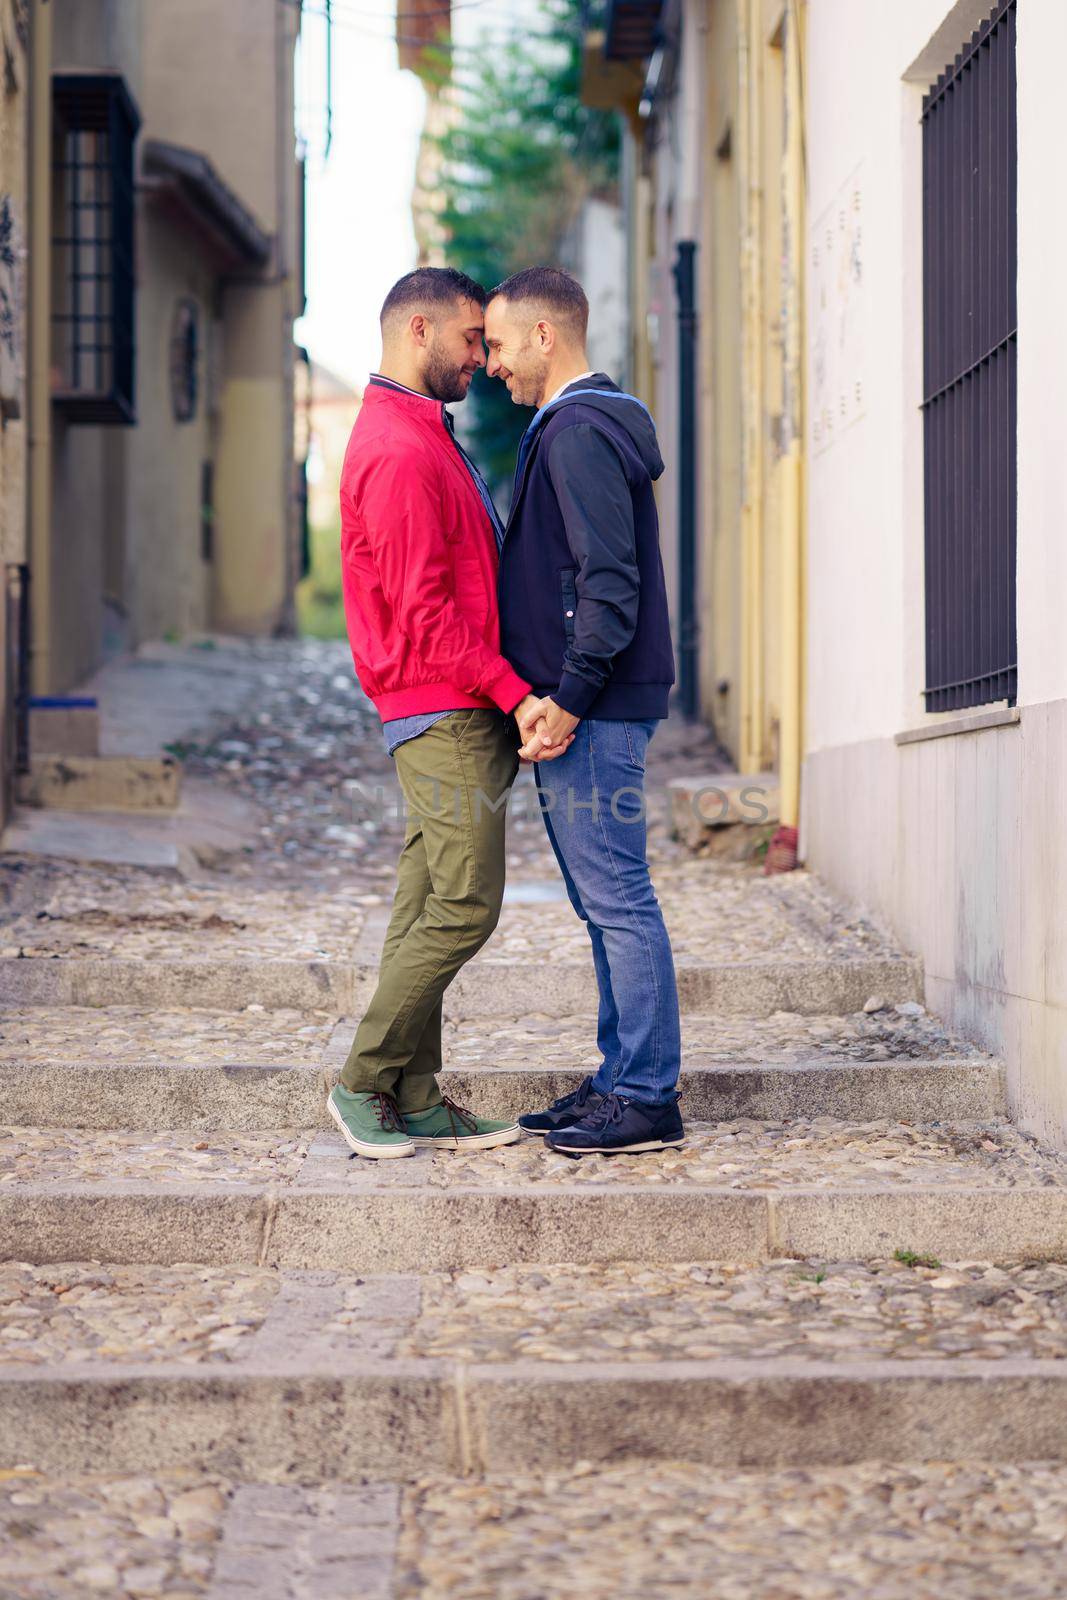 Gay couple in a romantic moment in the street. by javiindy